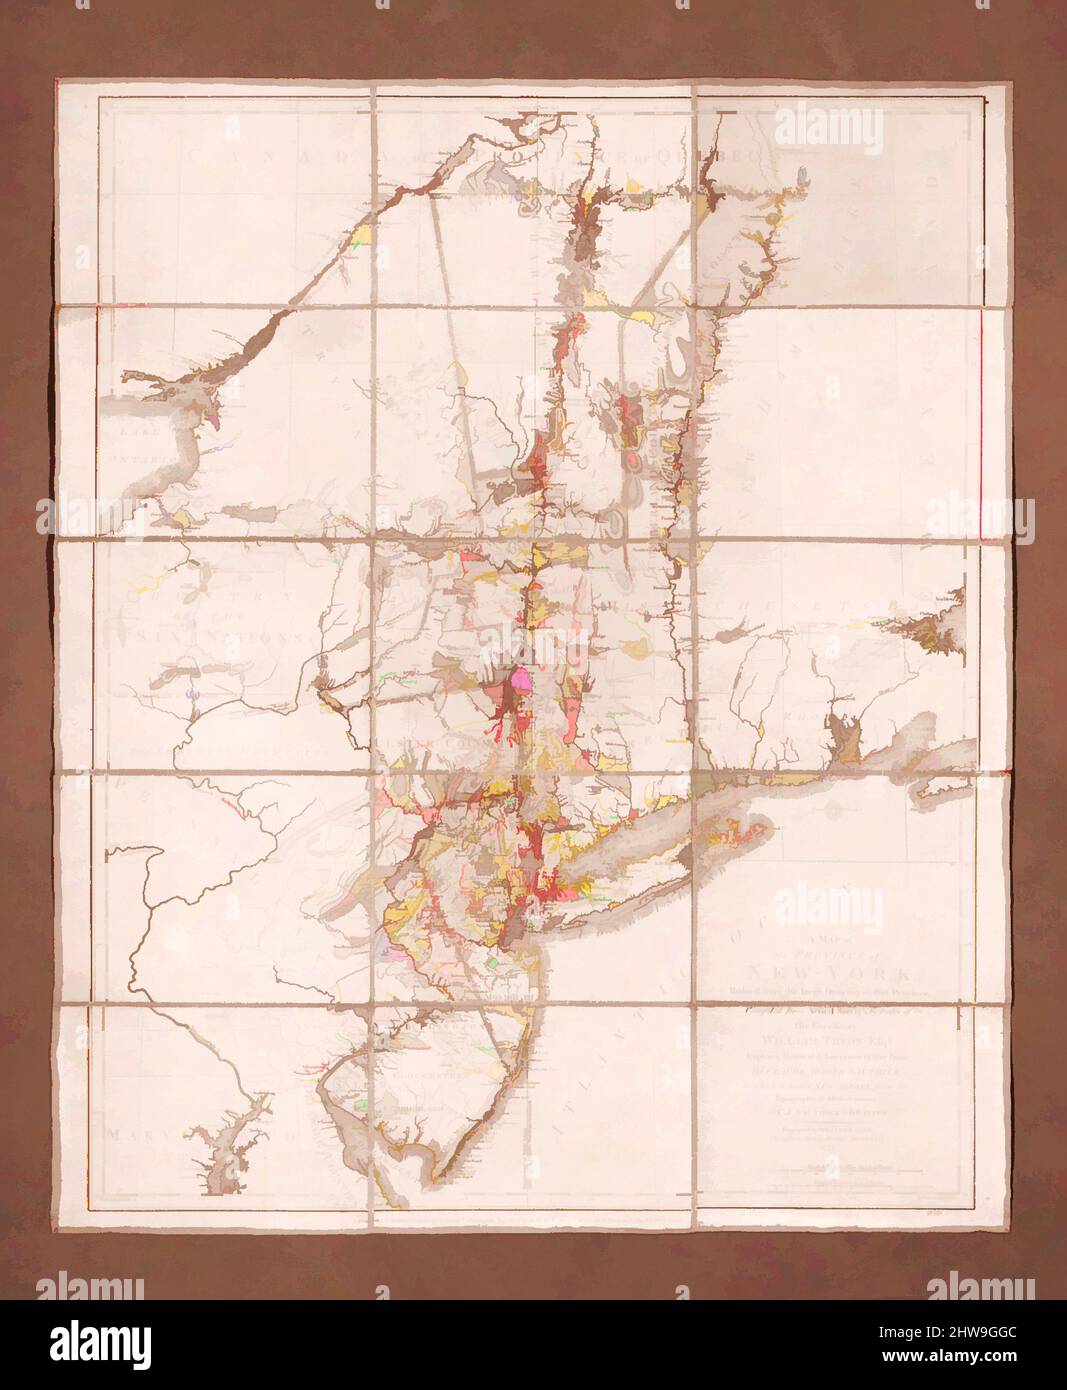 Art inspired by Map of the Province of New York, 1776, Made in London, England, Ink on paper mounted on canvas, 29 11/16 x 24 3/4 in. (75.4 x 62.9 cm), Natural Substances, William Faden the Younger (British, London 1749–1836 Shepperton, Classic works modernized by Artotop with a splash of modernity. Shapes, color and value, eye-catching visual impact on art. Emotions through freedom of artworks in a contemporary way. A timeless message pursuing a wildly creative new direction. Artists turning to the digital medium and creating the Artotop NFT Stock Photo